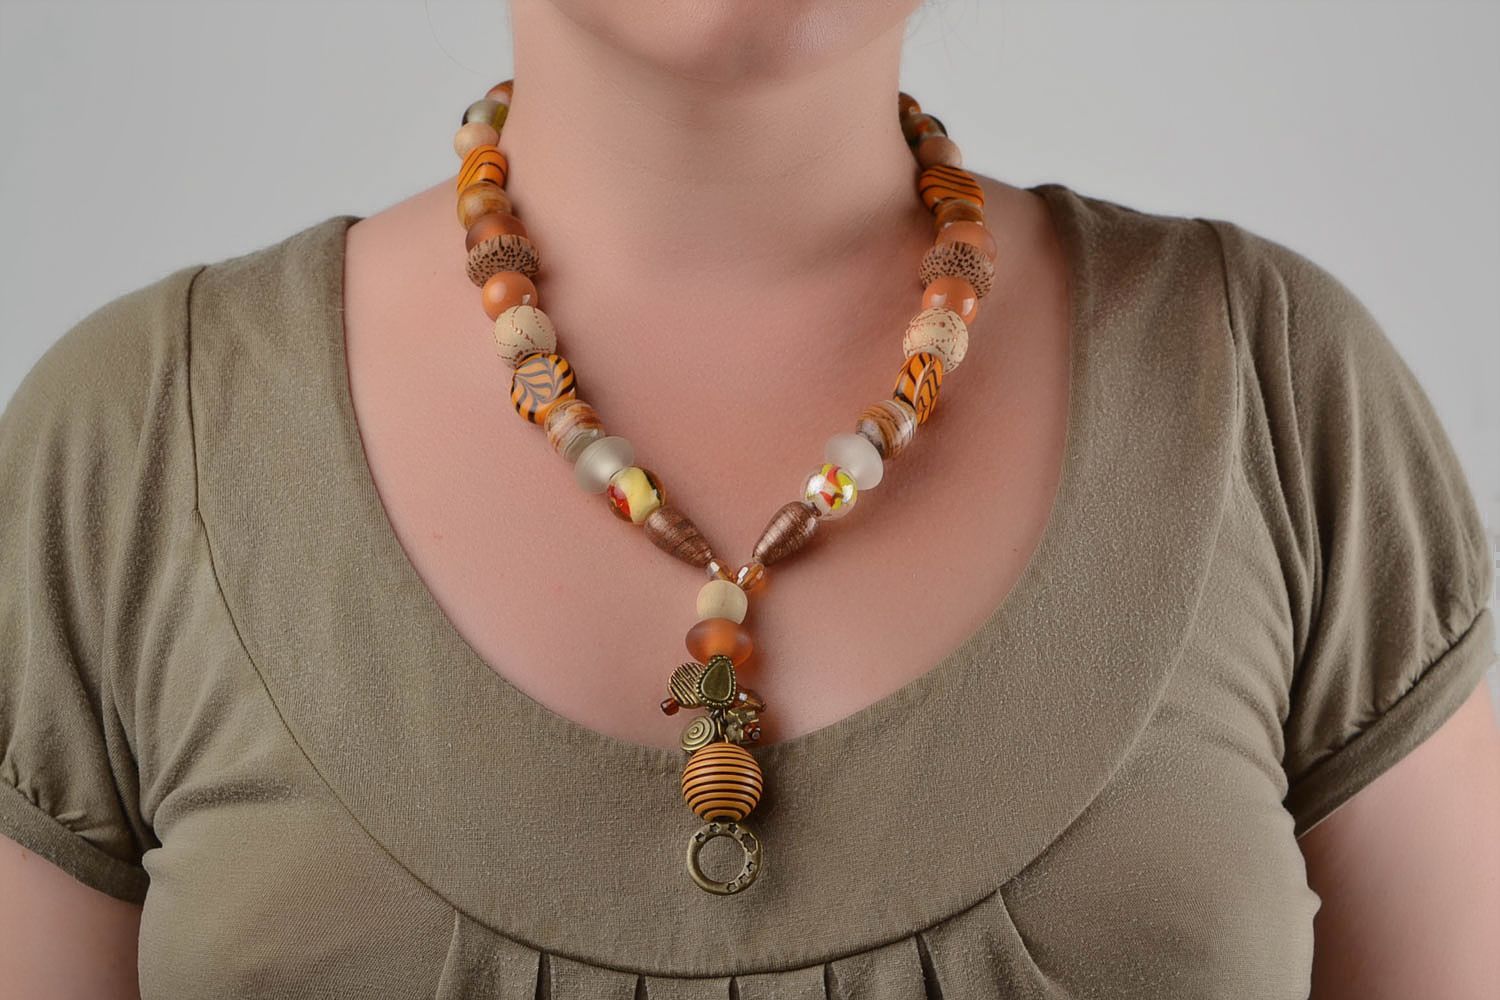 Handmade natural stone necklace with jadeite crystal and cork wood beads photo 5